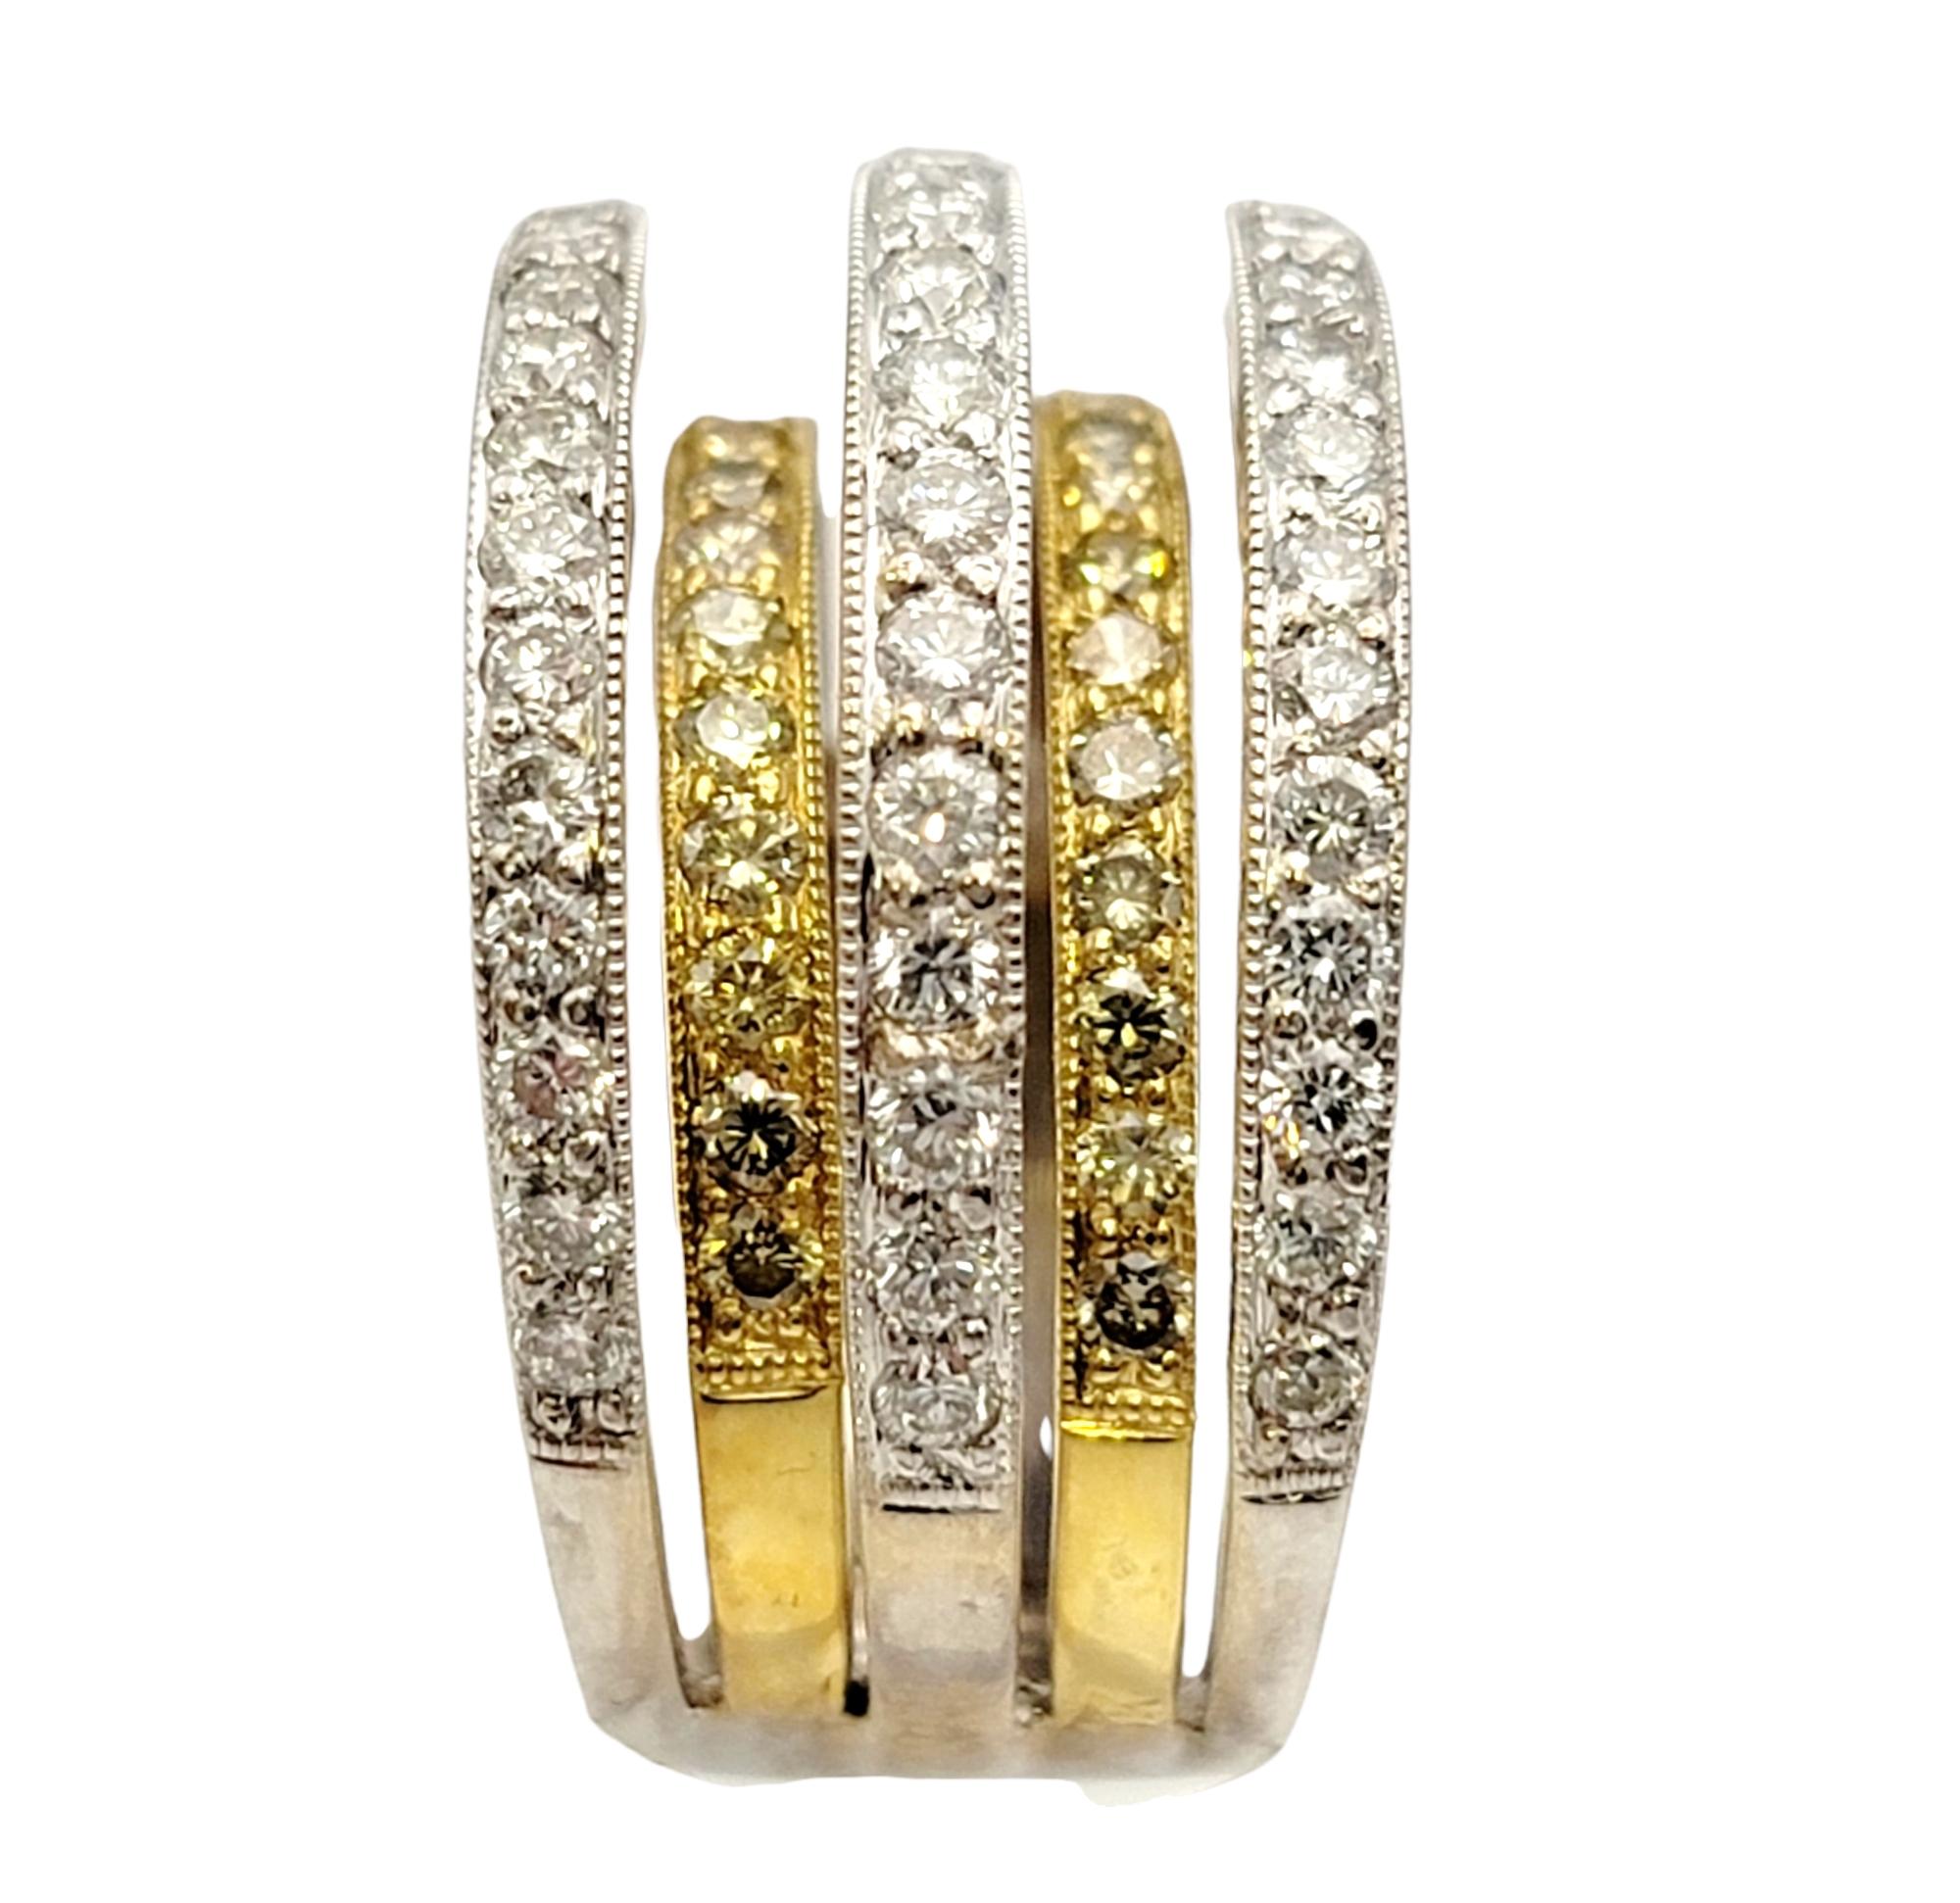 Ring size: 6.75

This stunning five row diamond band ring wraps elegantly around the finger and fills it with sparkle from end to end. Featuring a contemporary two-toned design, this ring offers both beauty and individuality. The unique high/low